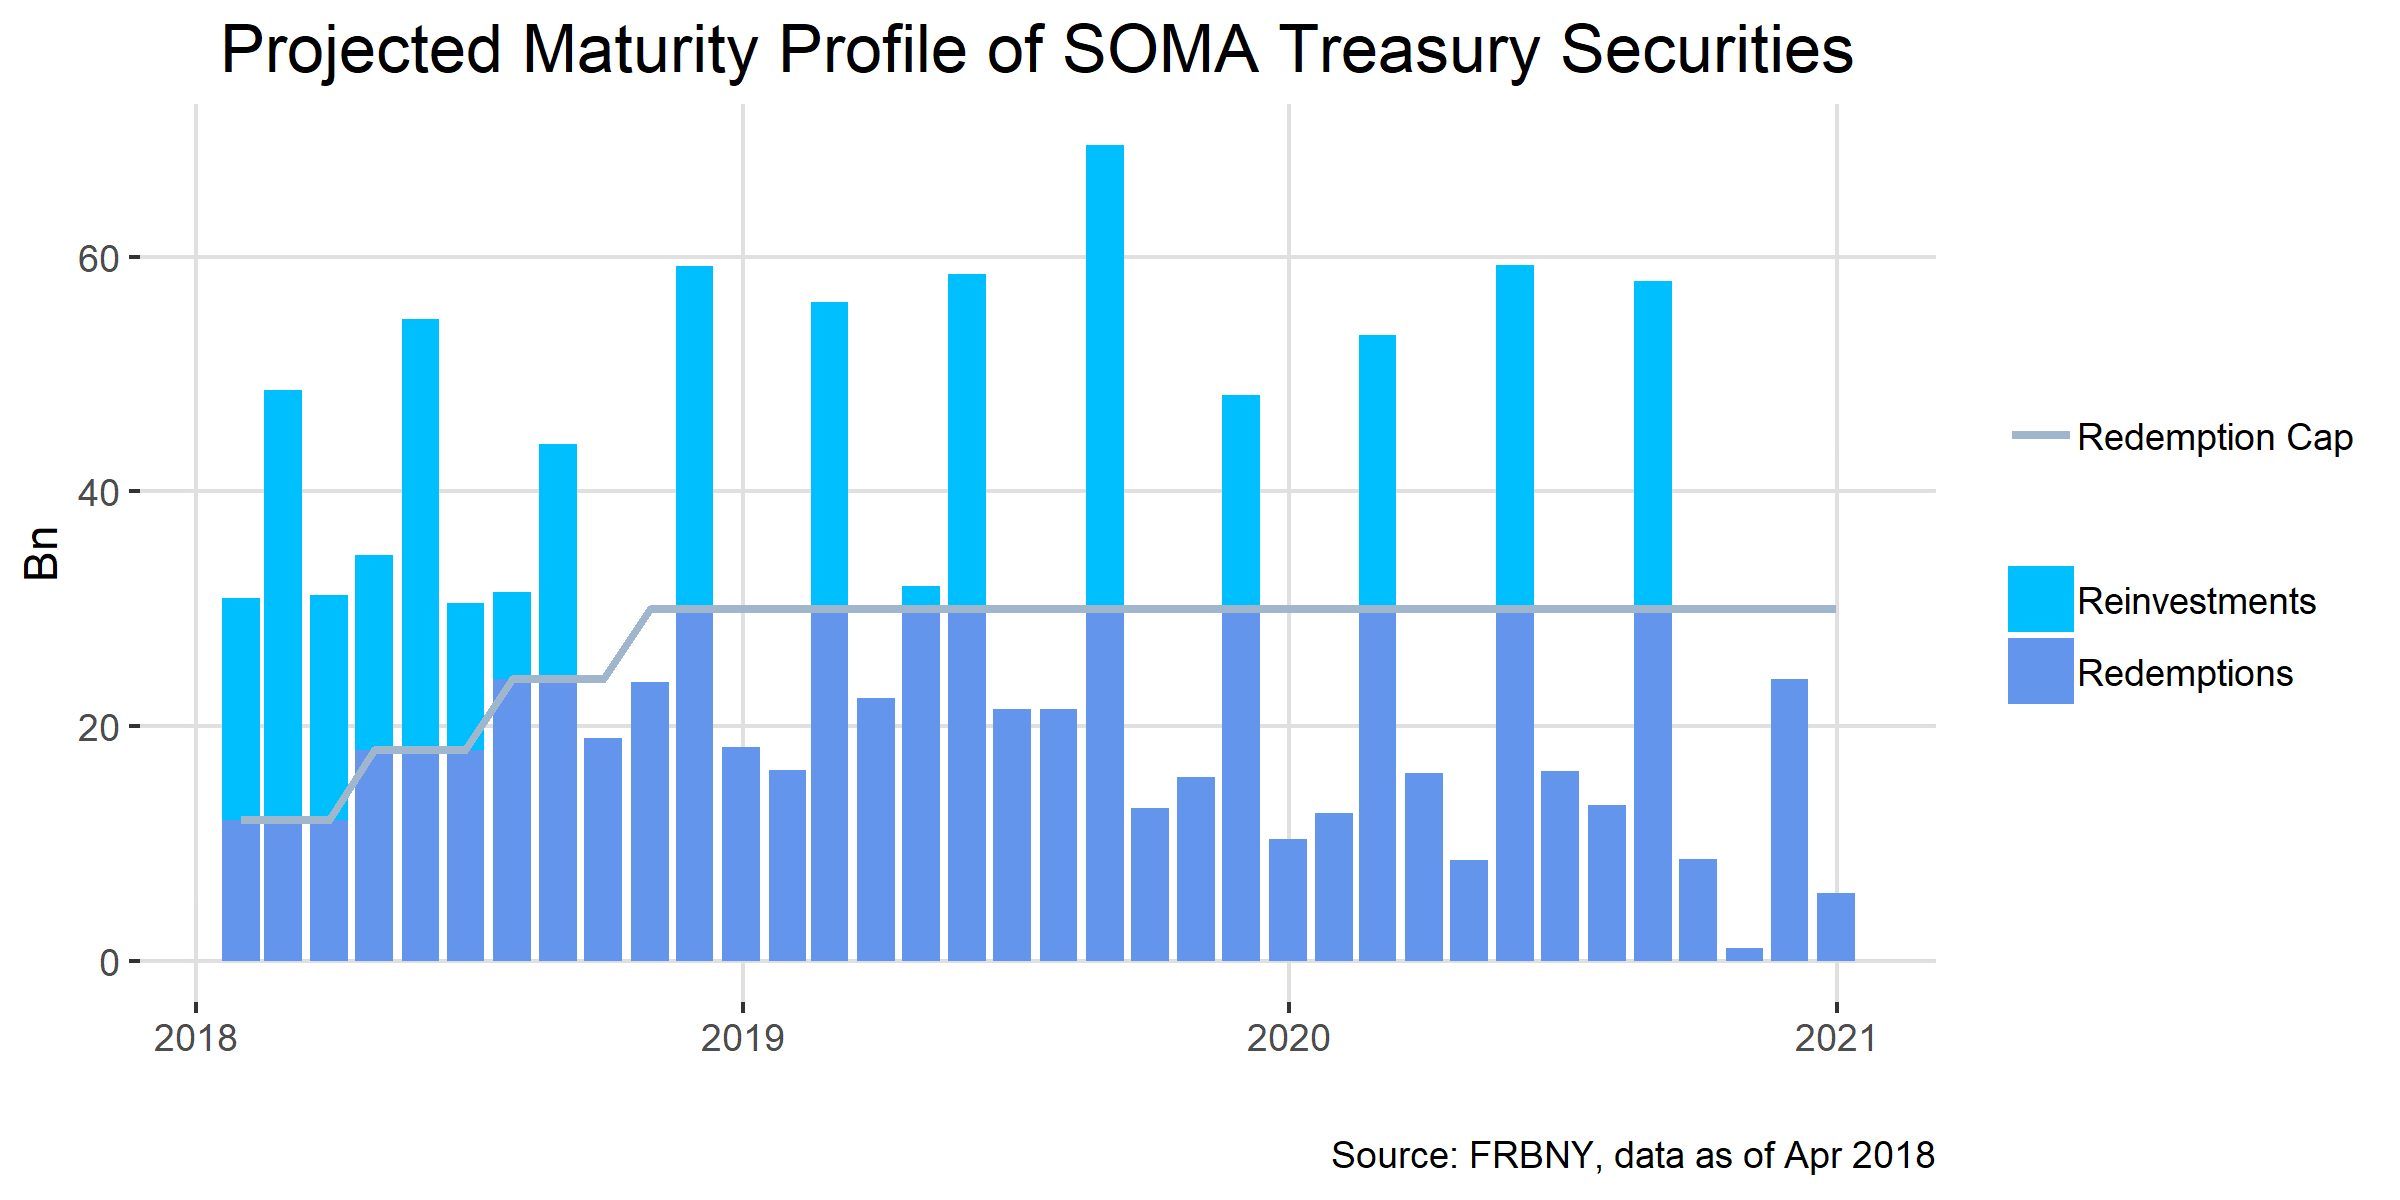 Projected Maturity Profile of SOMA Treasury Securities